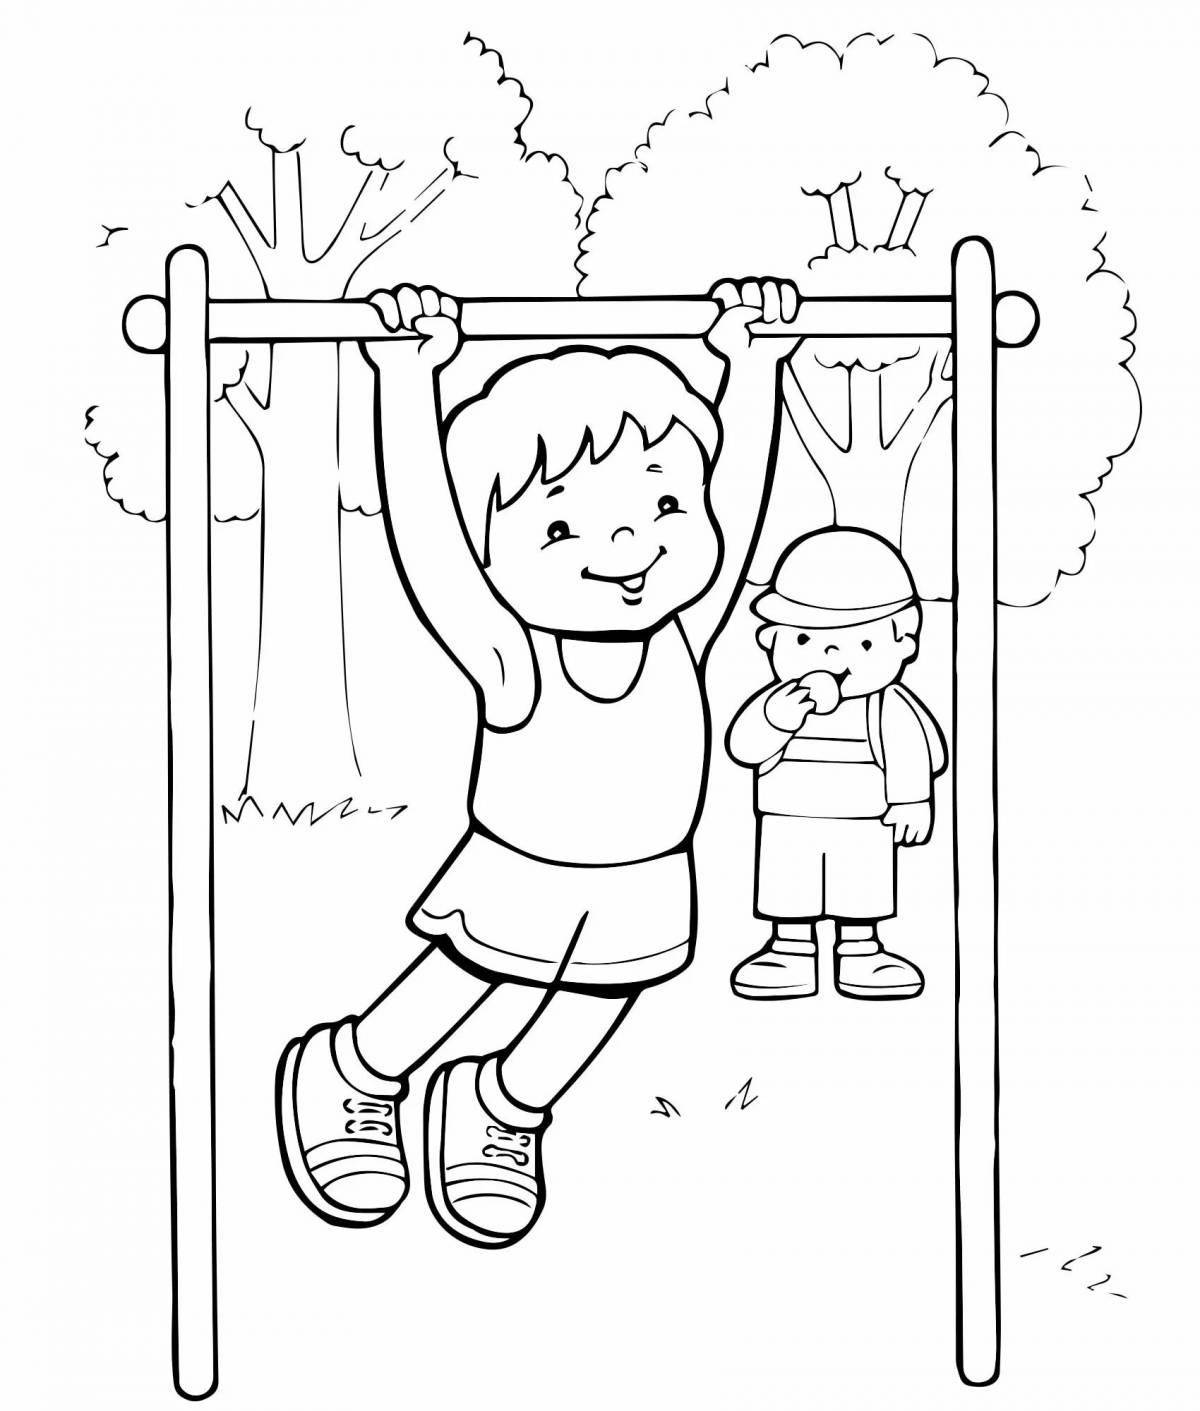 Creative health education coloring page